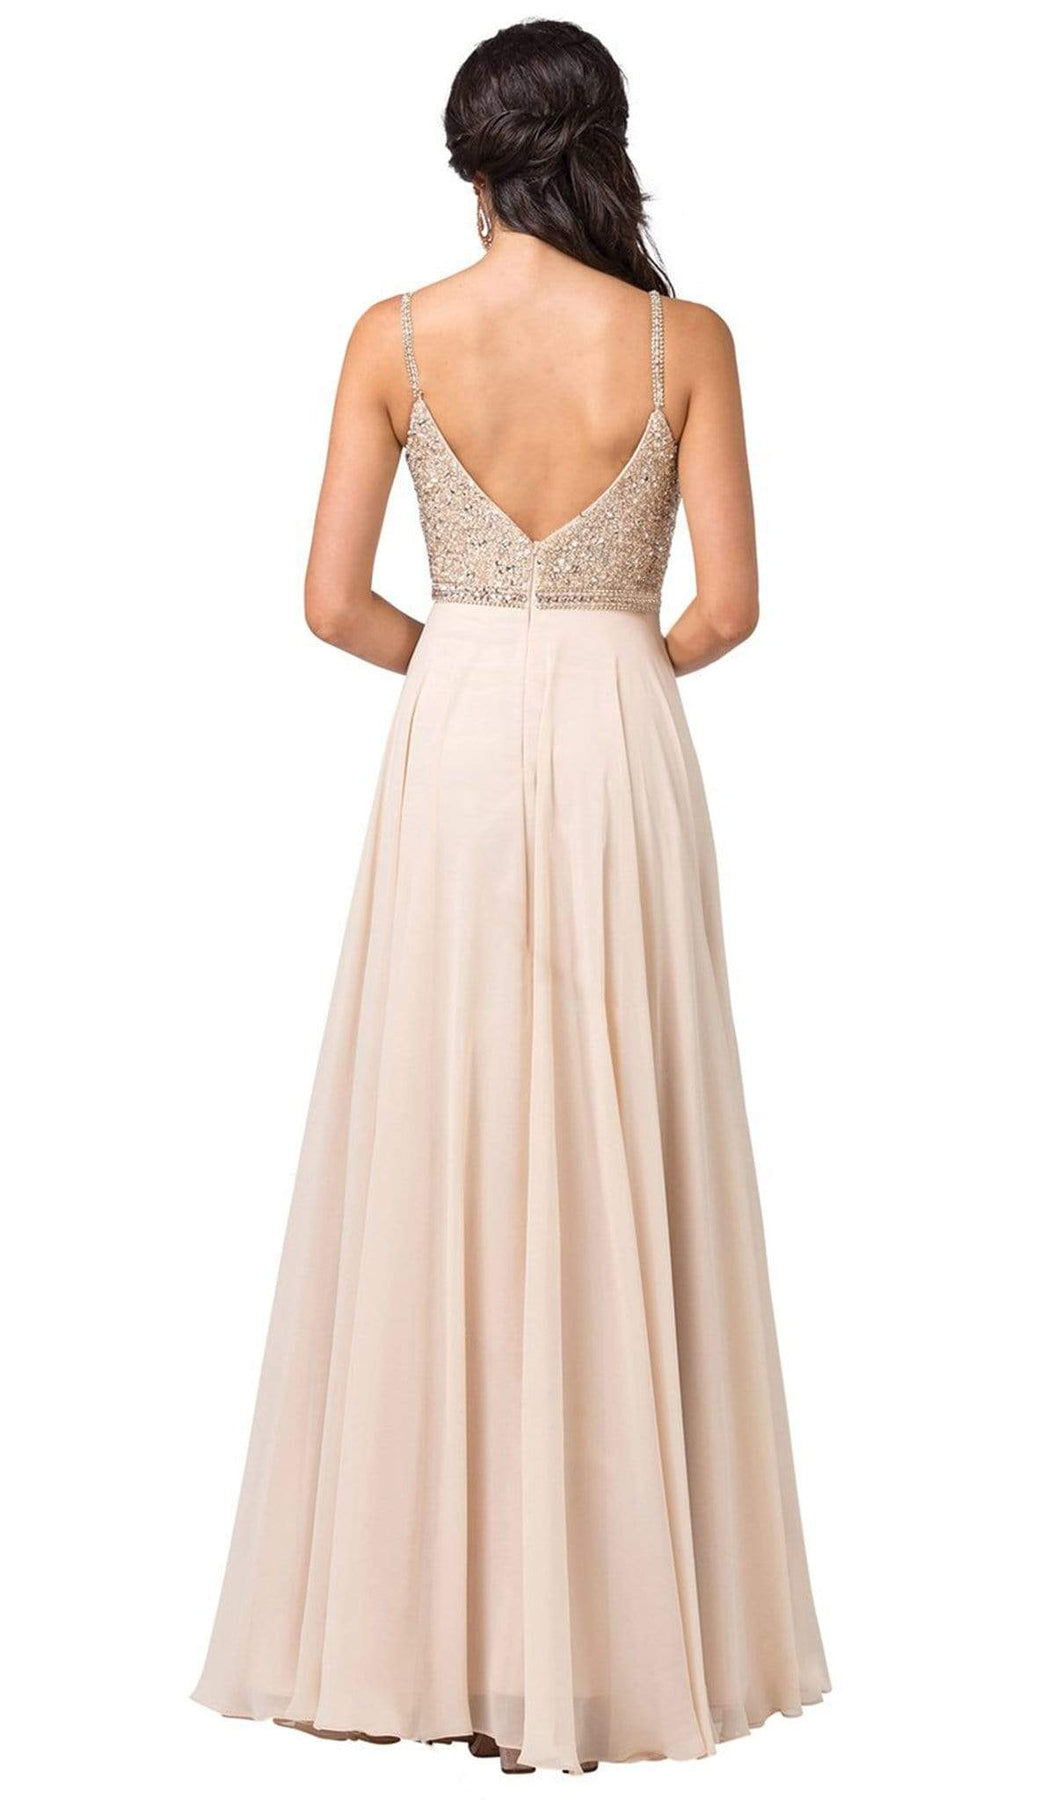 Dancing Queen - 2493 Jewel Beaded A-Line Chiffon Gown Prom Dresses